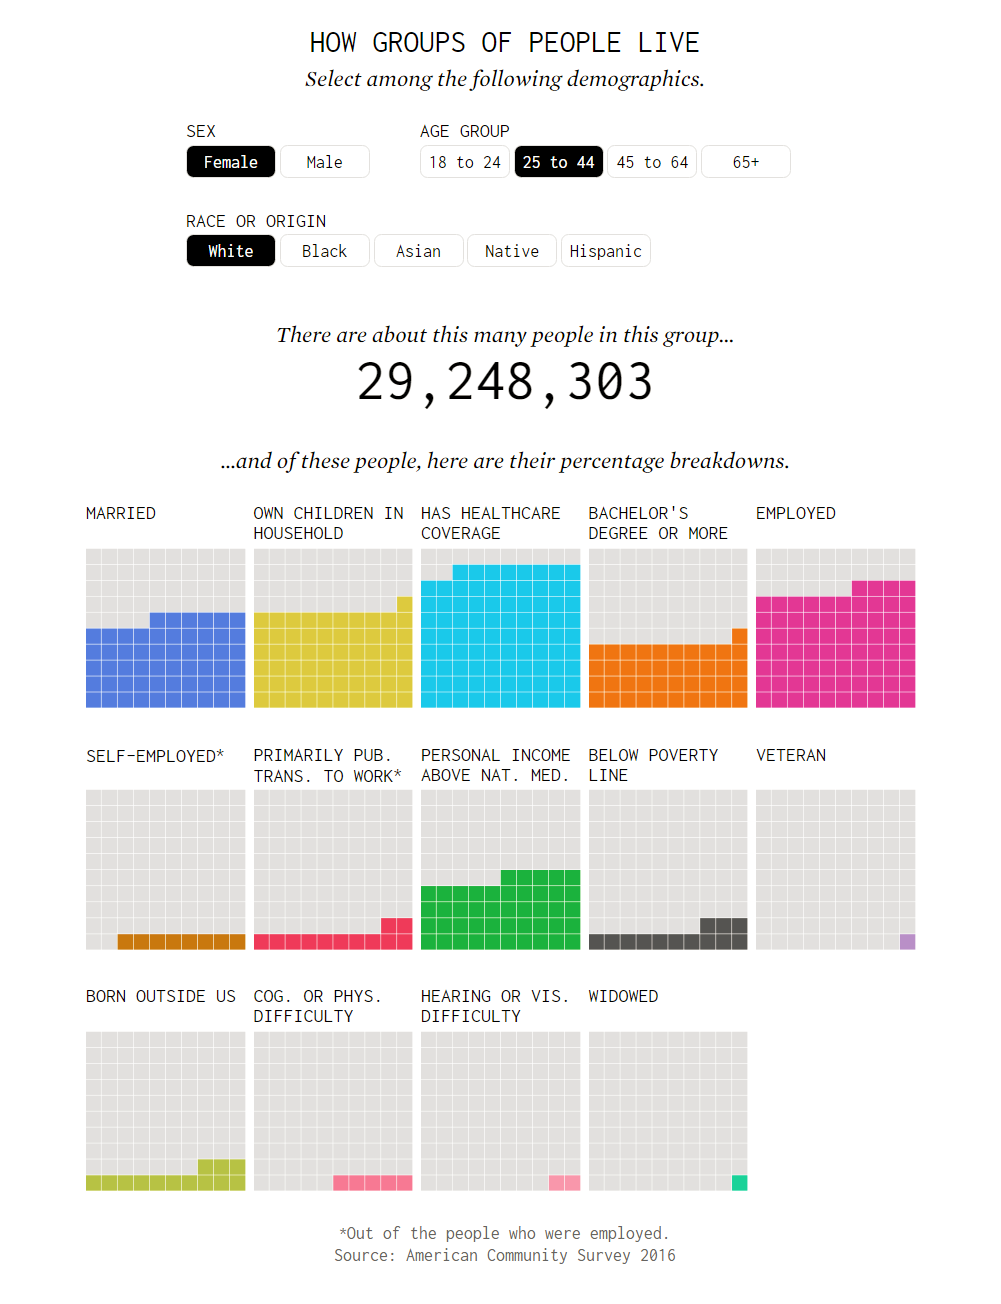 Life of Different Groups of American People, in New Cool Data Visualization